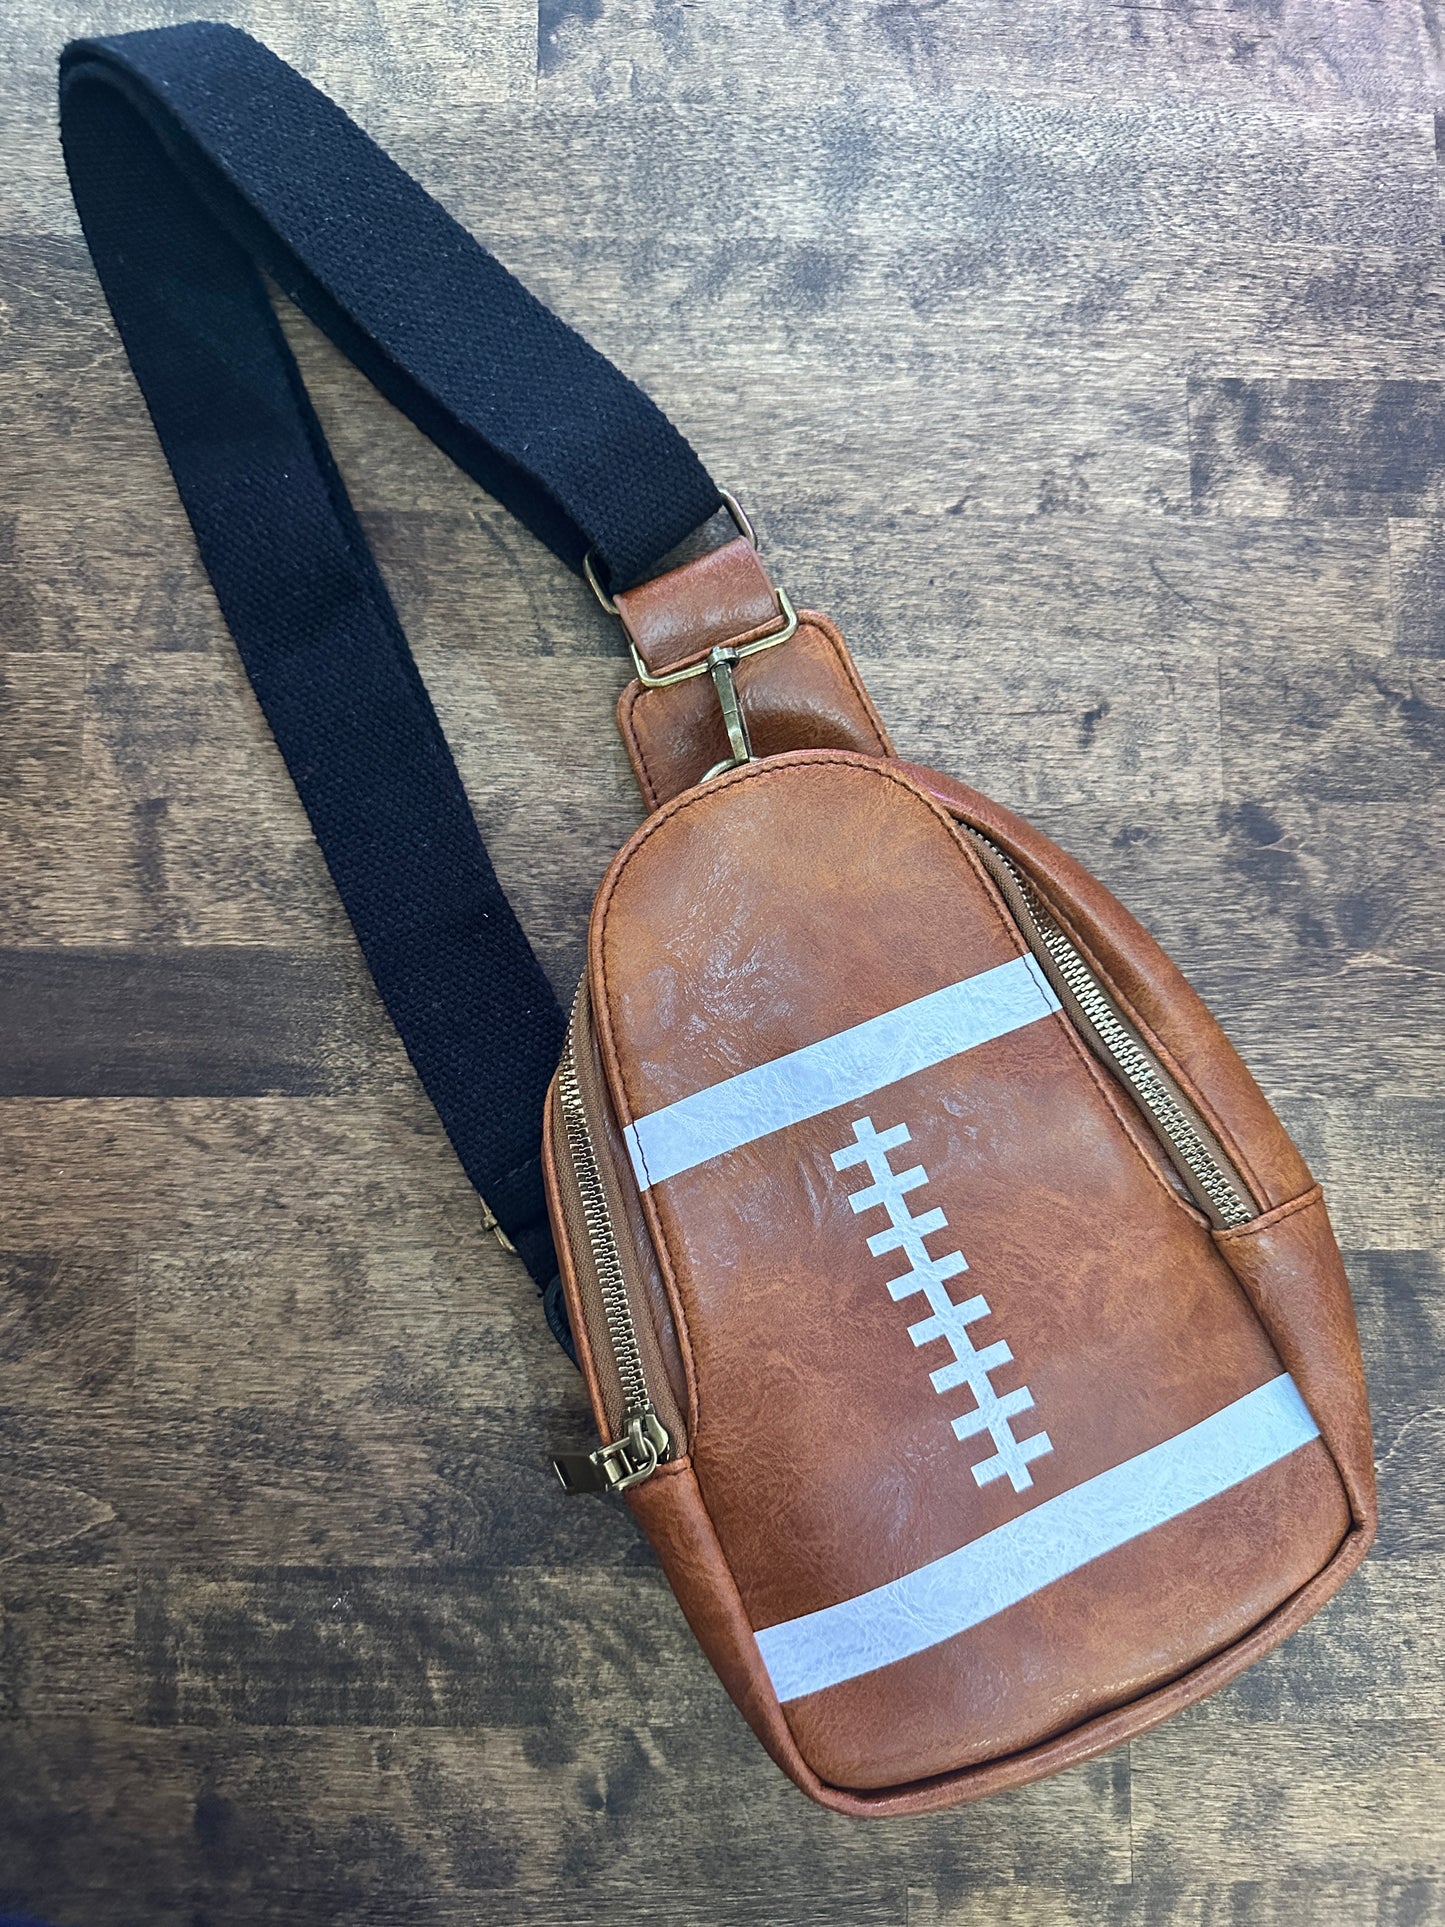 All the Sports Cross Body